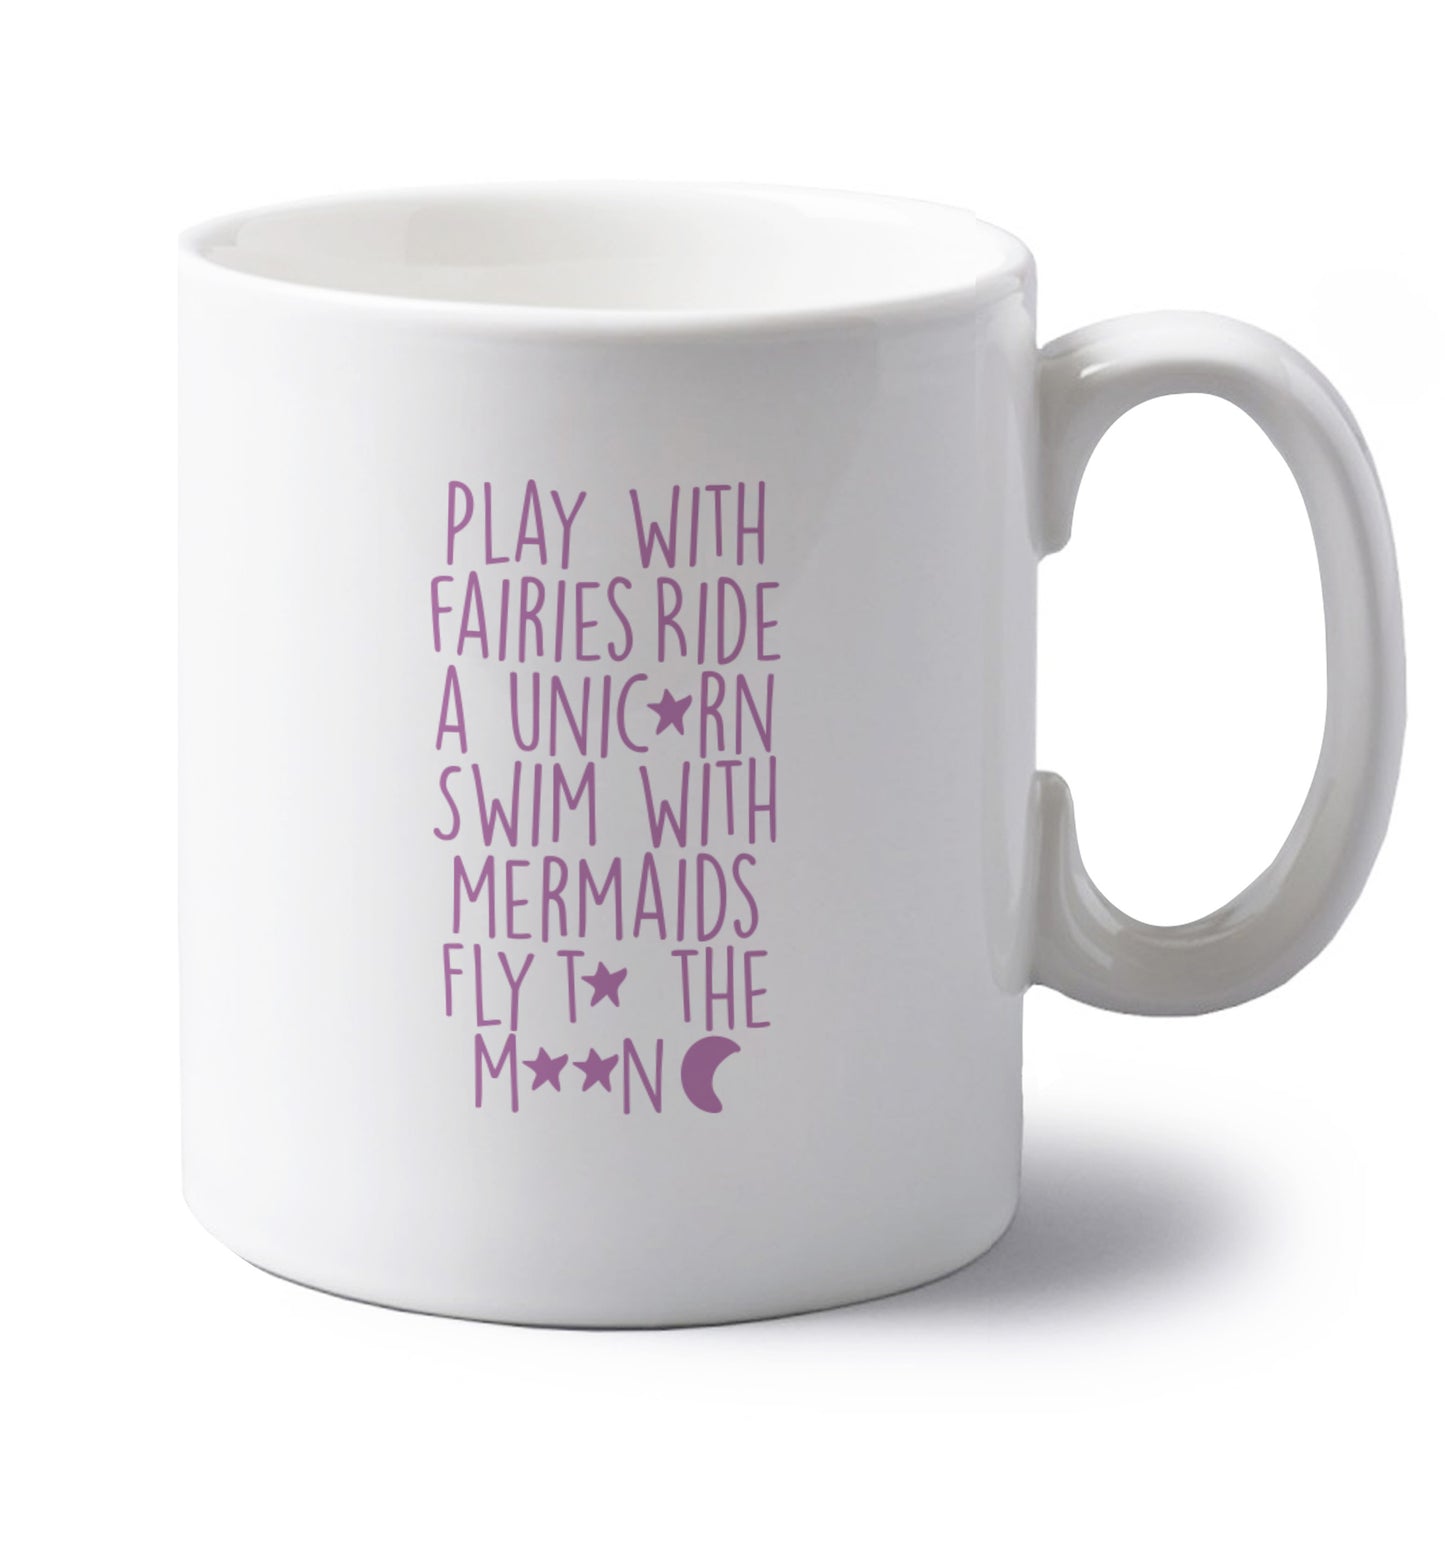 Play with fairies ride a unicorn swim with mermaids fly to the moon left handed white ceramic mug 